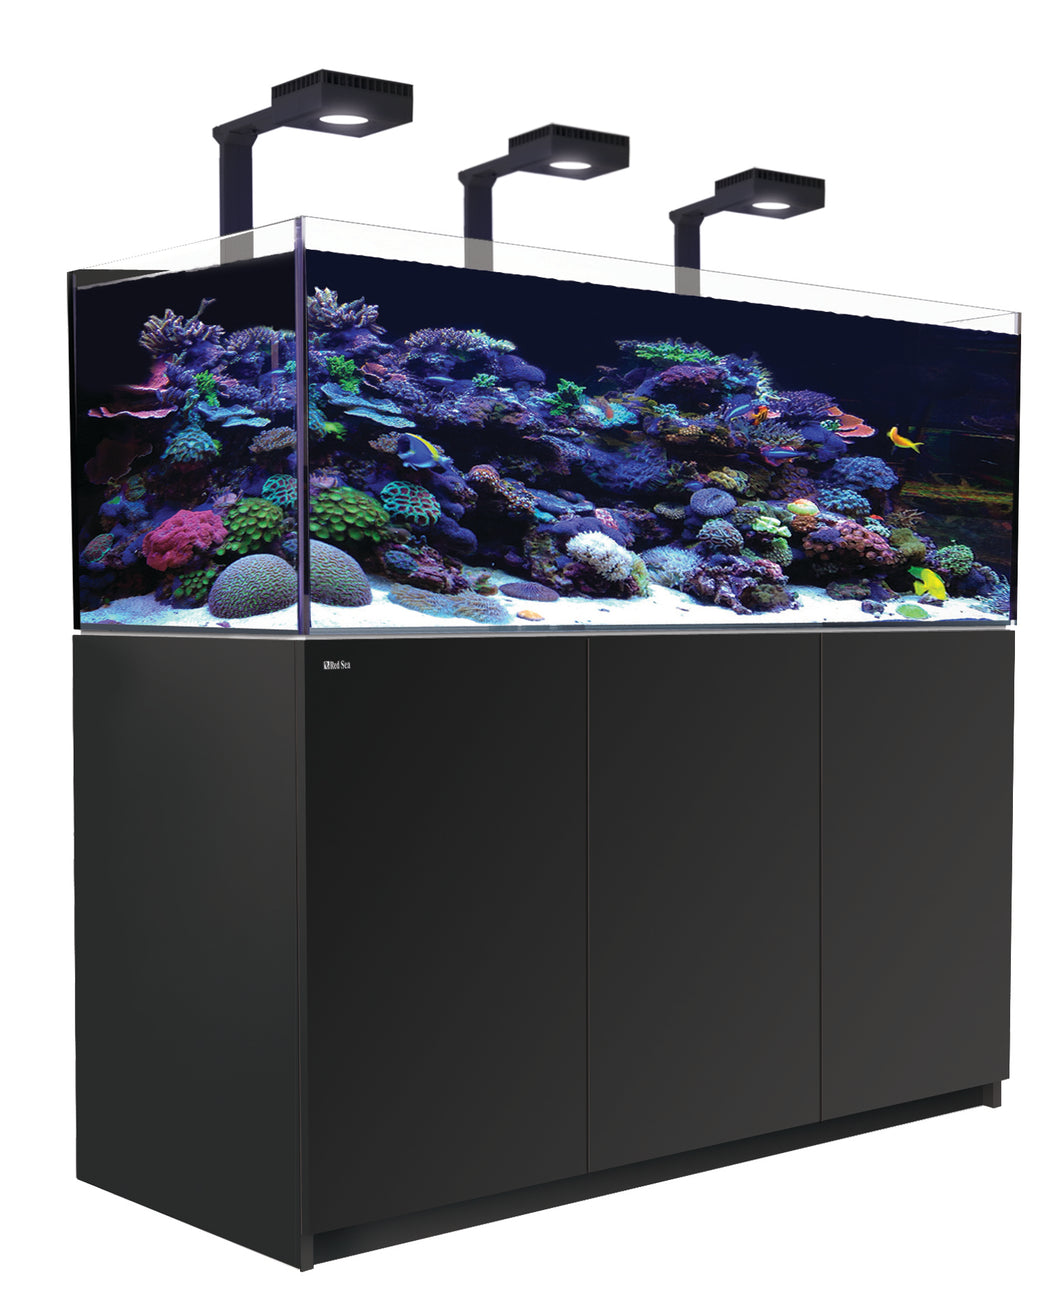 Red Sea REEFER-525 G2 Deluxe Premium Reef Aquarium 143 Gallons Reef-Ready LED Systems